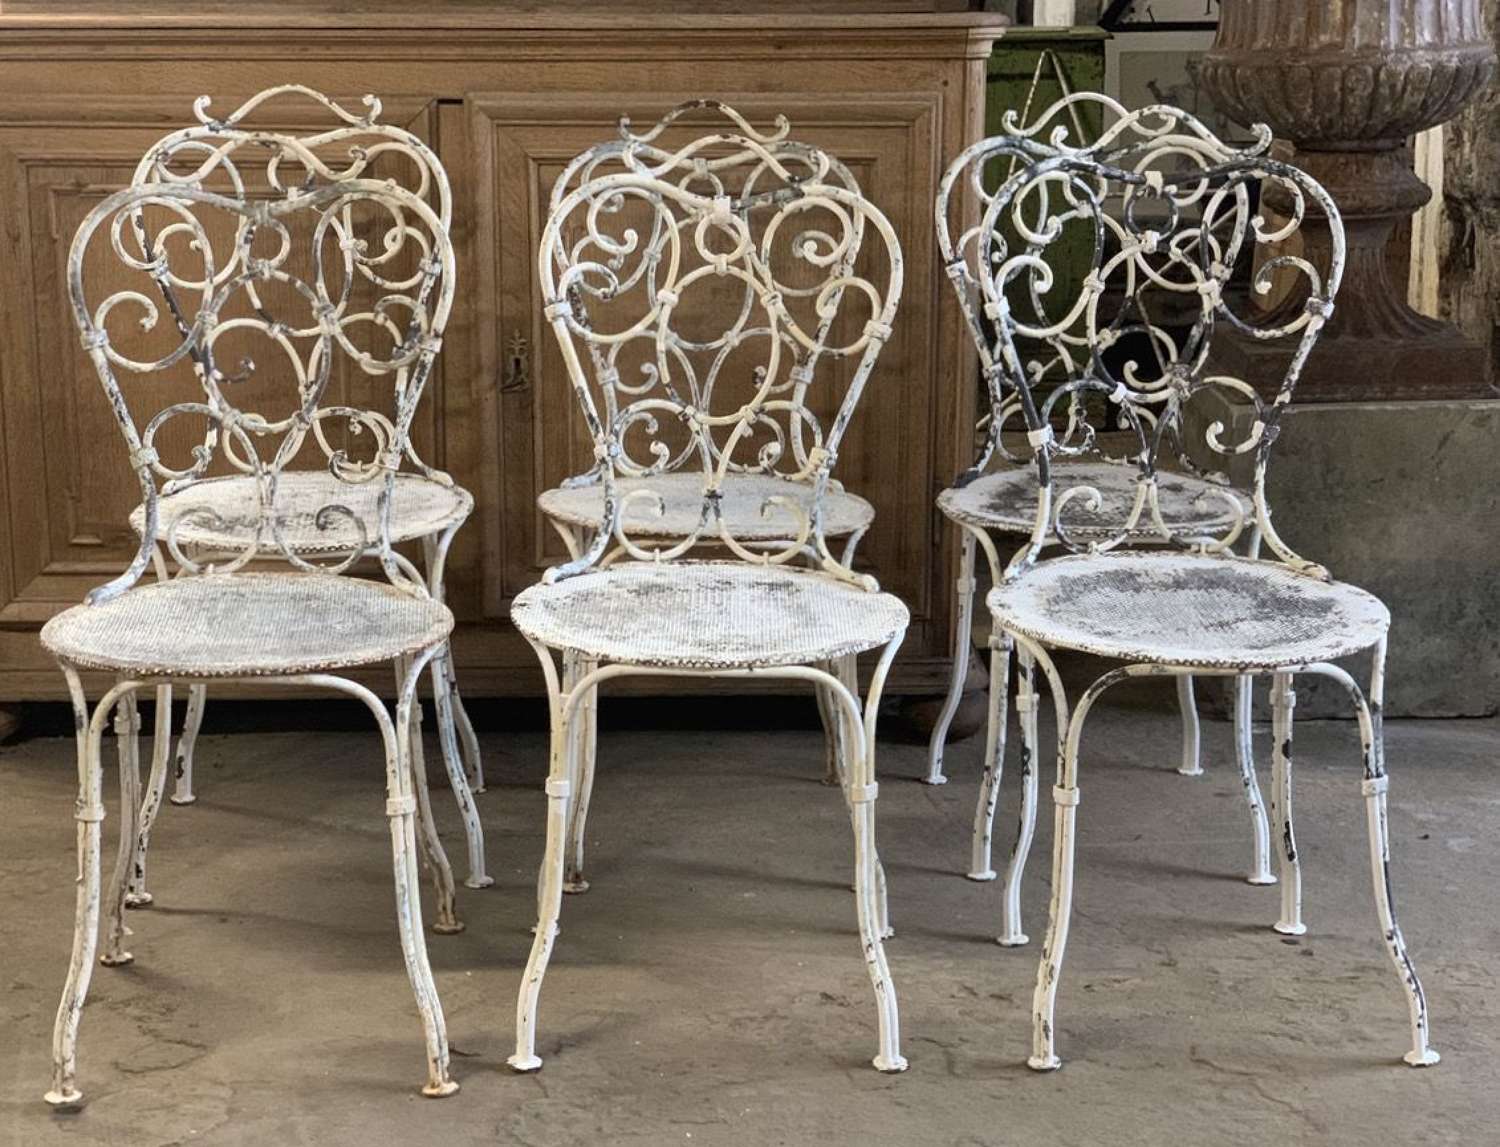 SET OF SIX  ANTIQUE FRENCH IRON GARDEN CHAIRS